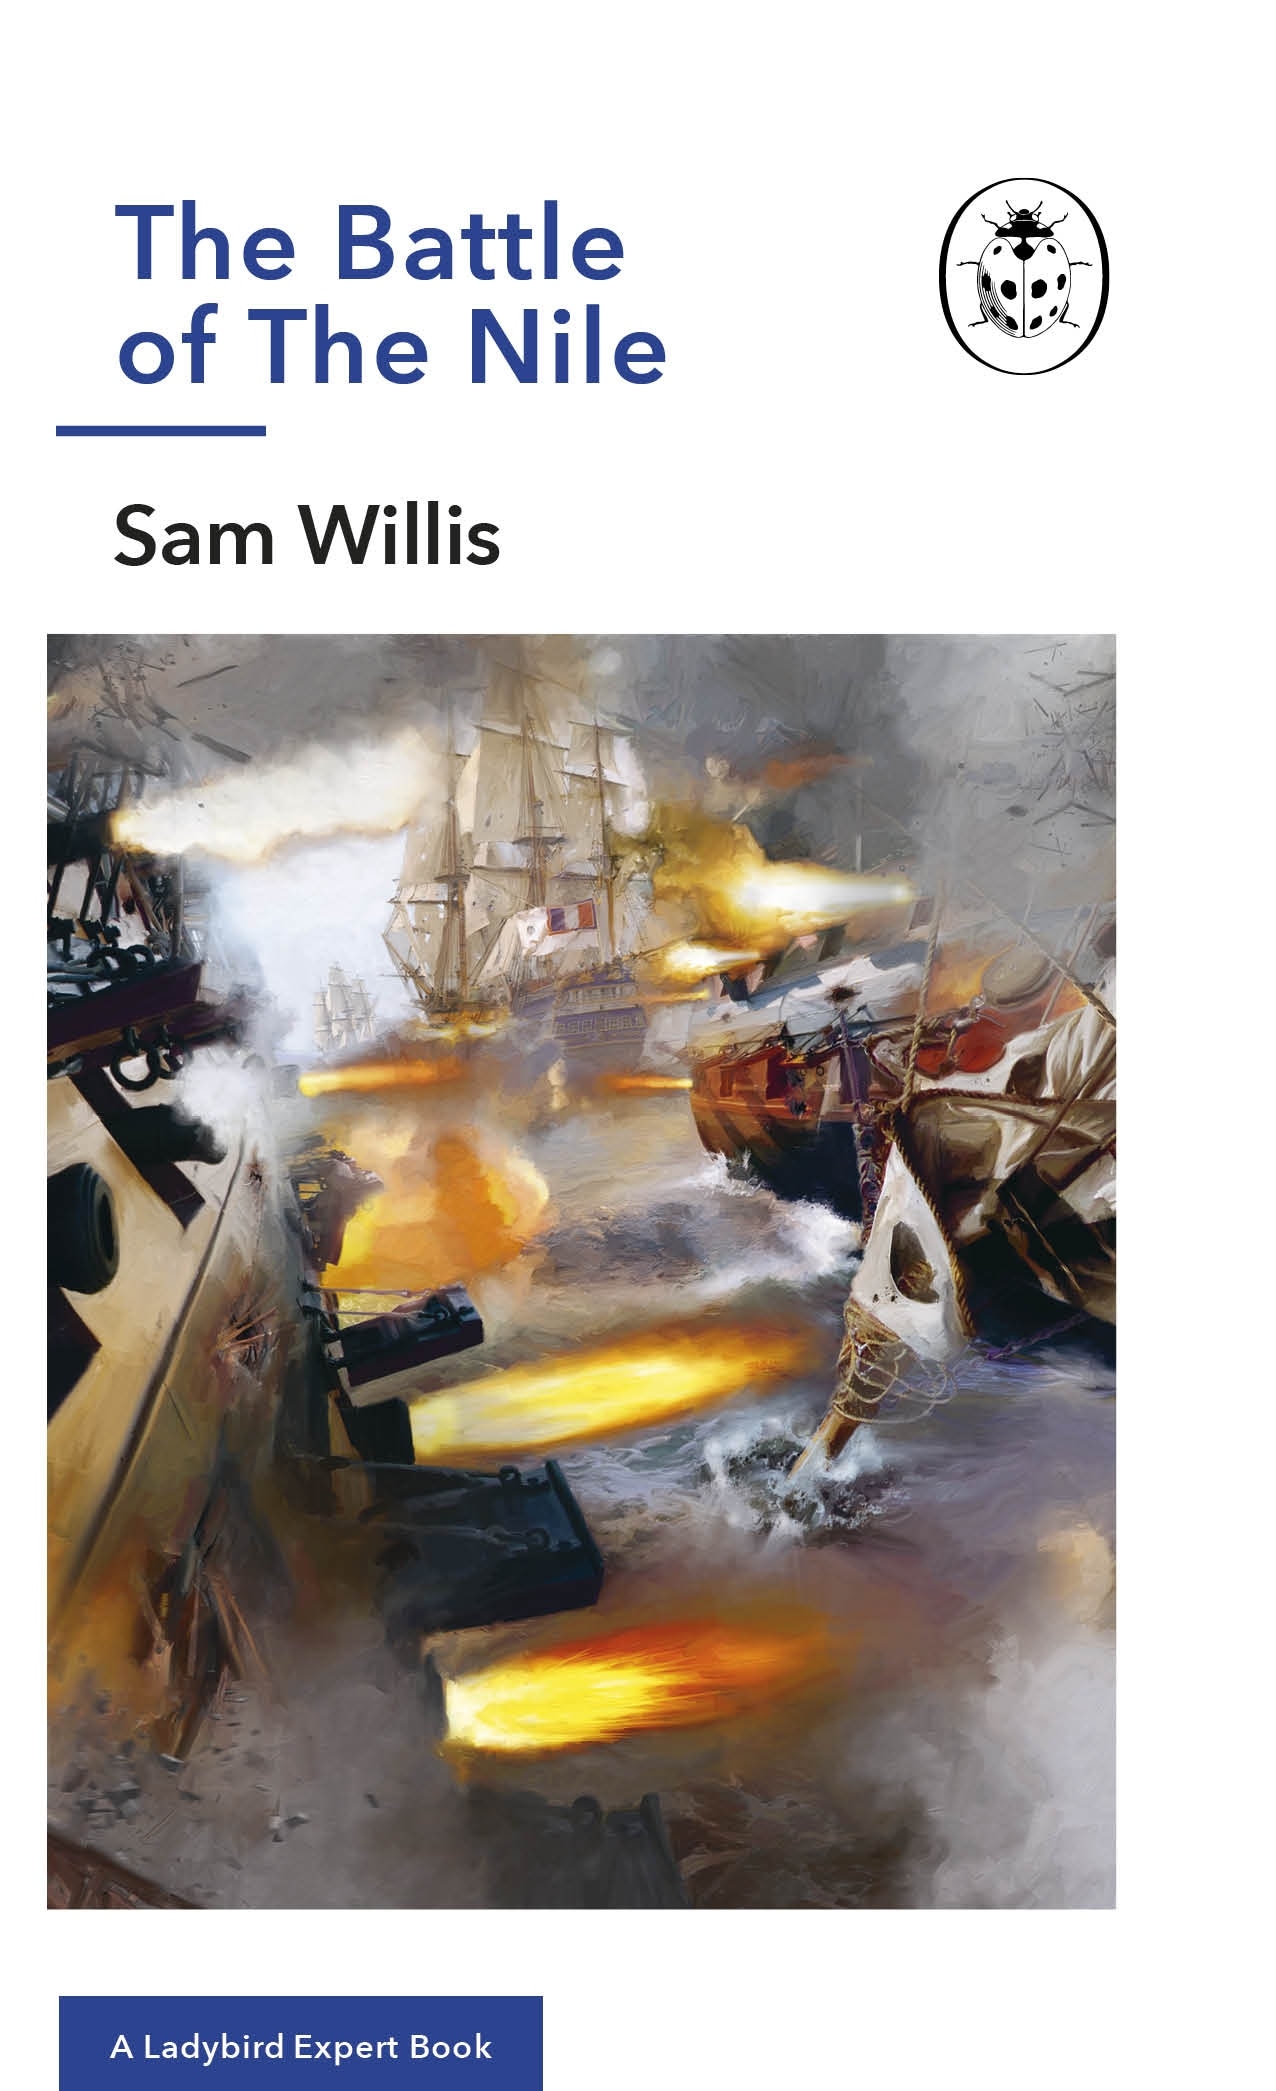 Book “The Battle of The Nile” by Sam Willis — February 7, 2019